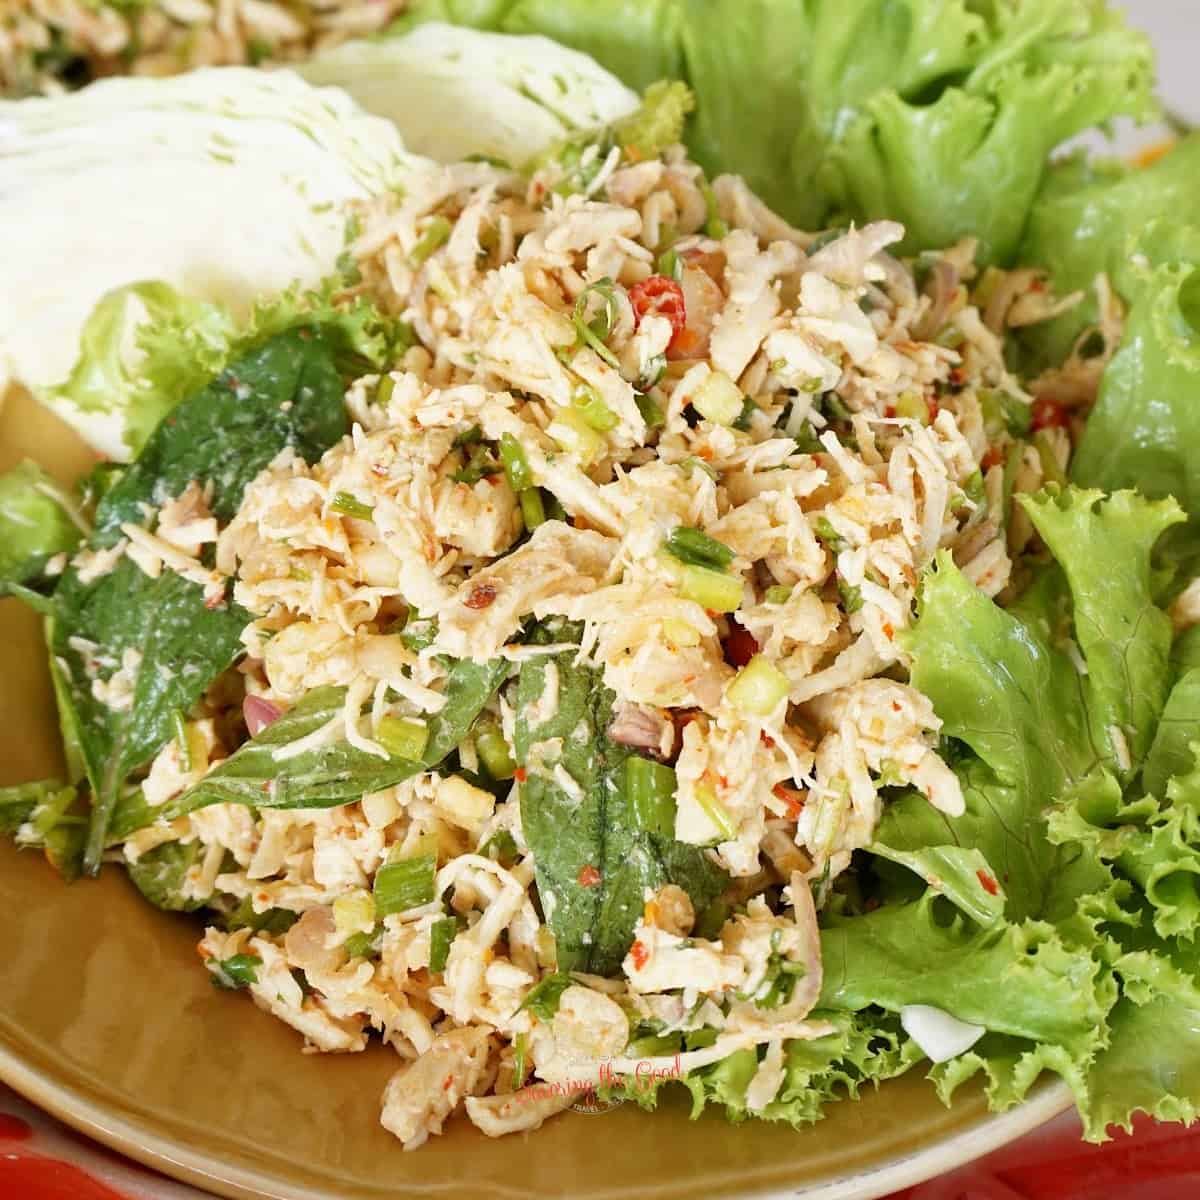 Thai chicken salad made with canned chicken on a plate with lettuce.